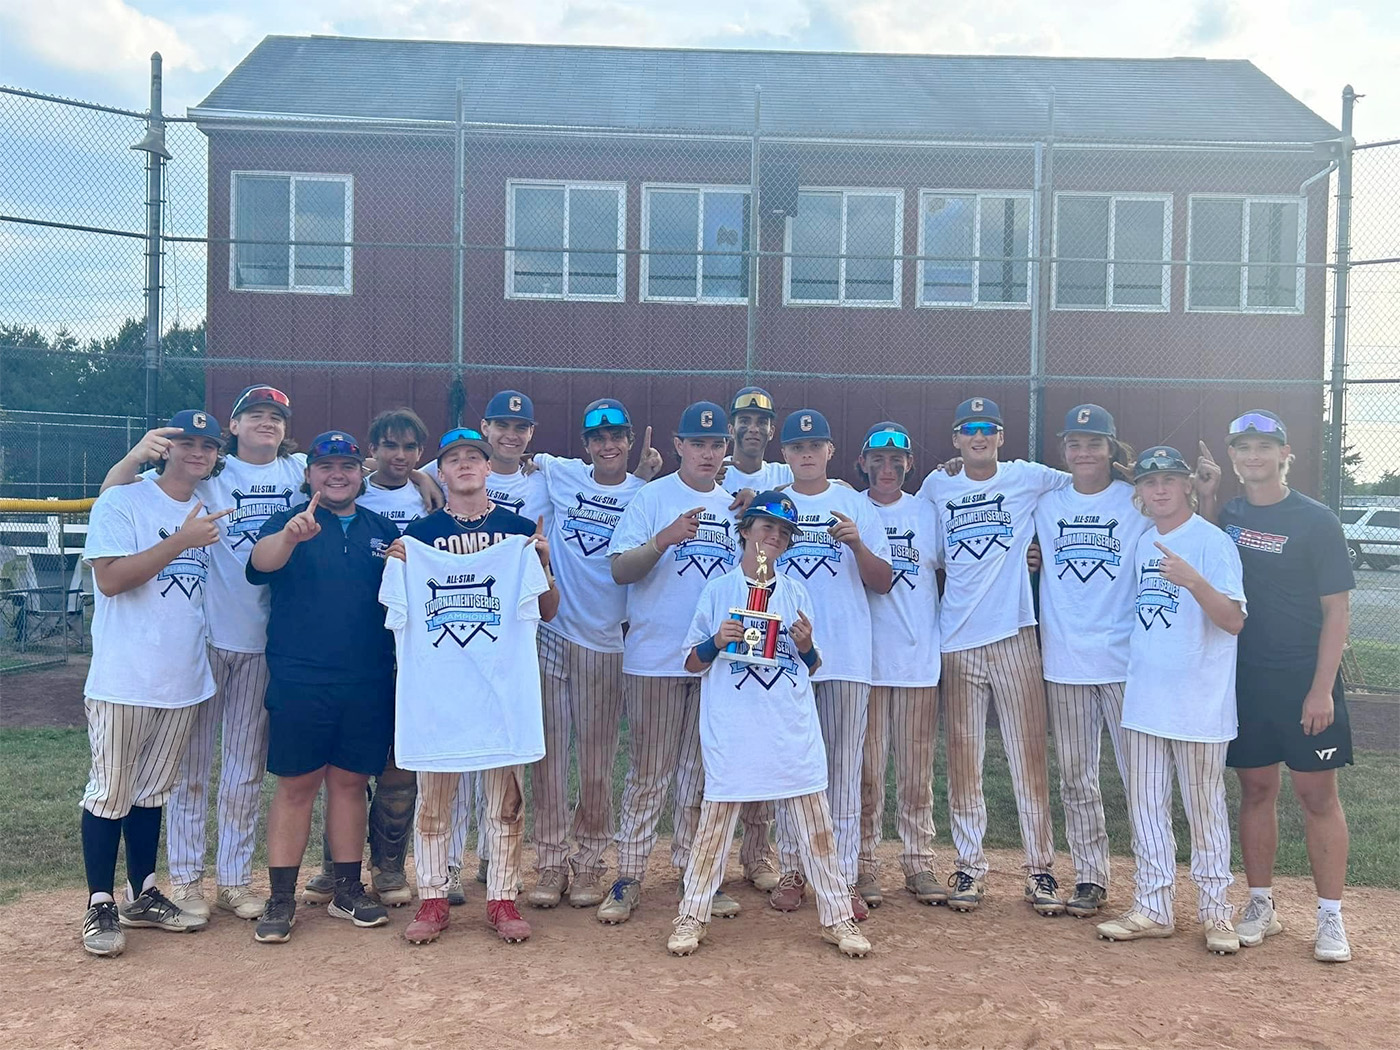 Congrats to SC Rams 16U for winning the Future Stars Championship this weekend! Scanzano Combat Baseball in New Jersey.